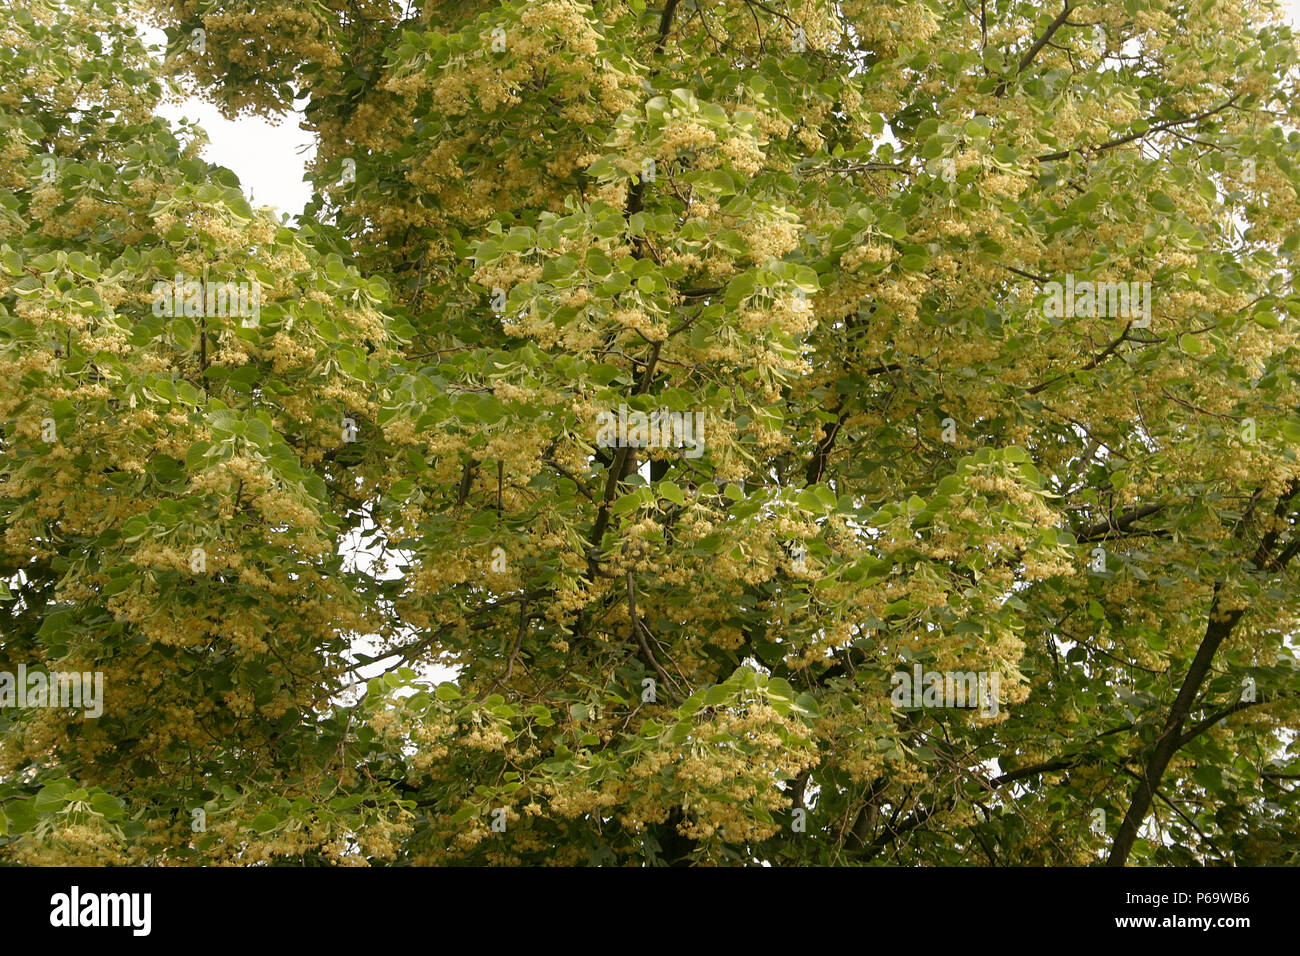 Close up of Linden tree blossom Stock Photo